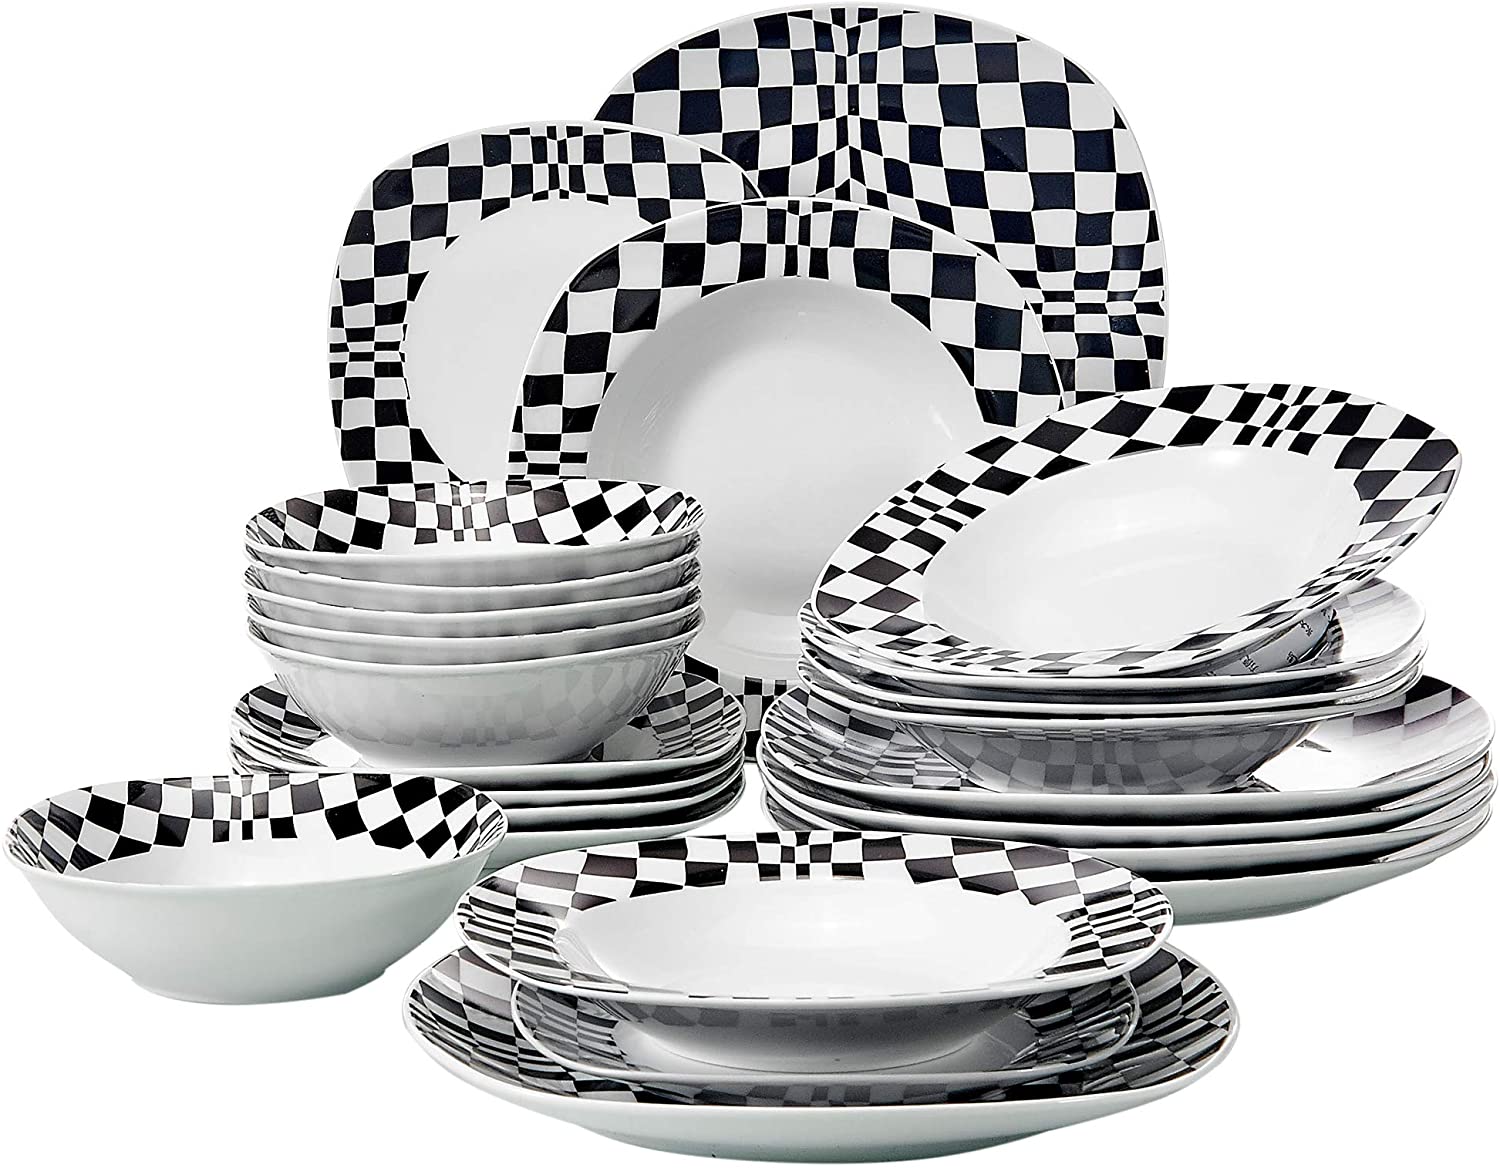 VEWEET Louise Porcelain Dinner Service 60 Pieces Dinner Service Includes Coffee Cups 175 ml, Saucer, Dessert Plate, Dinner Plate and Soup Plate Complete Service for 12 People